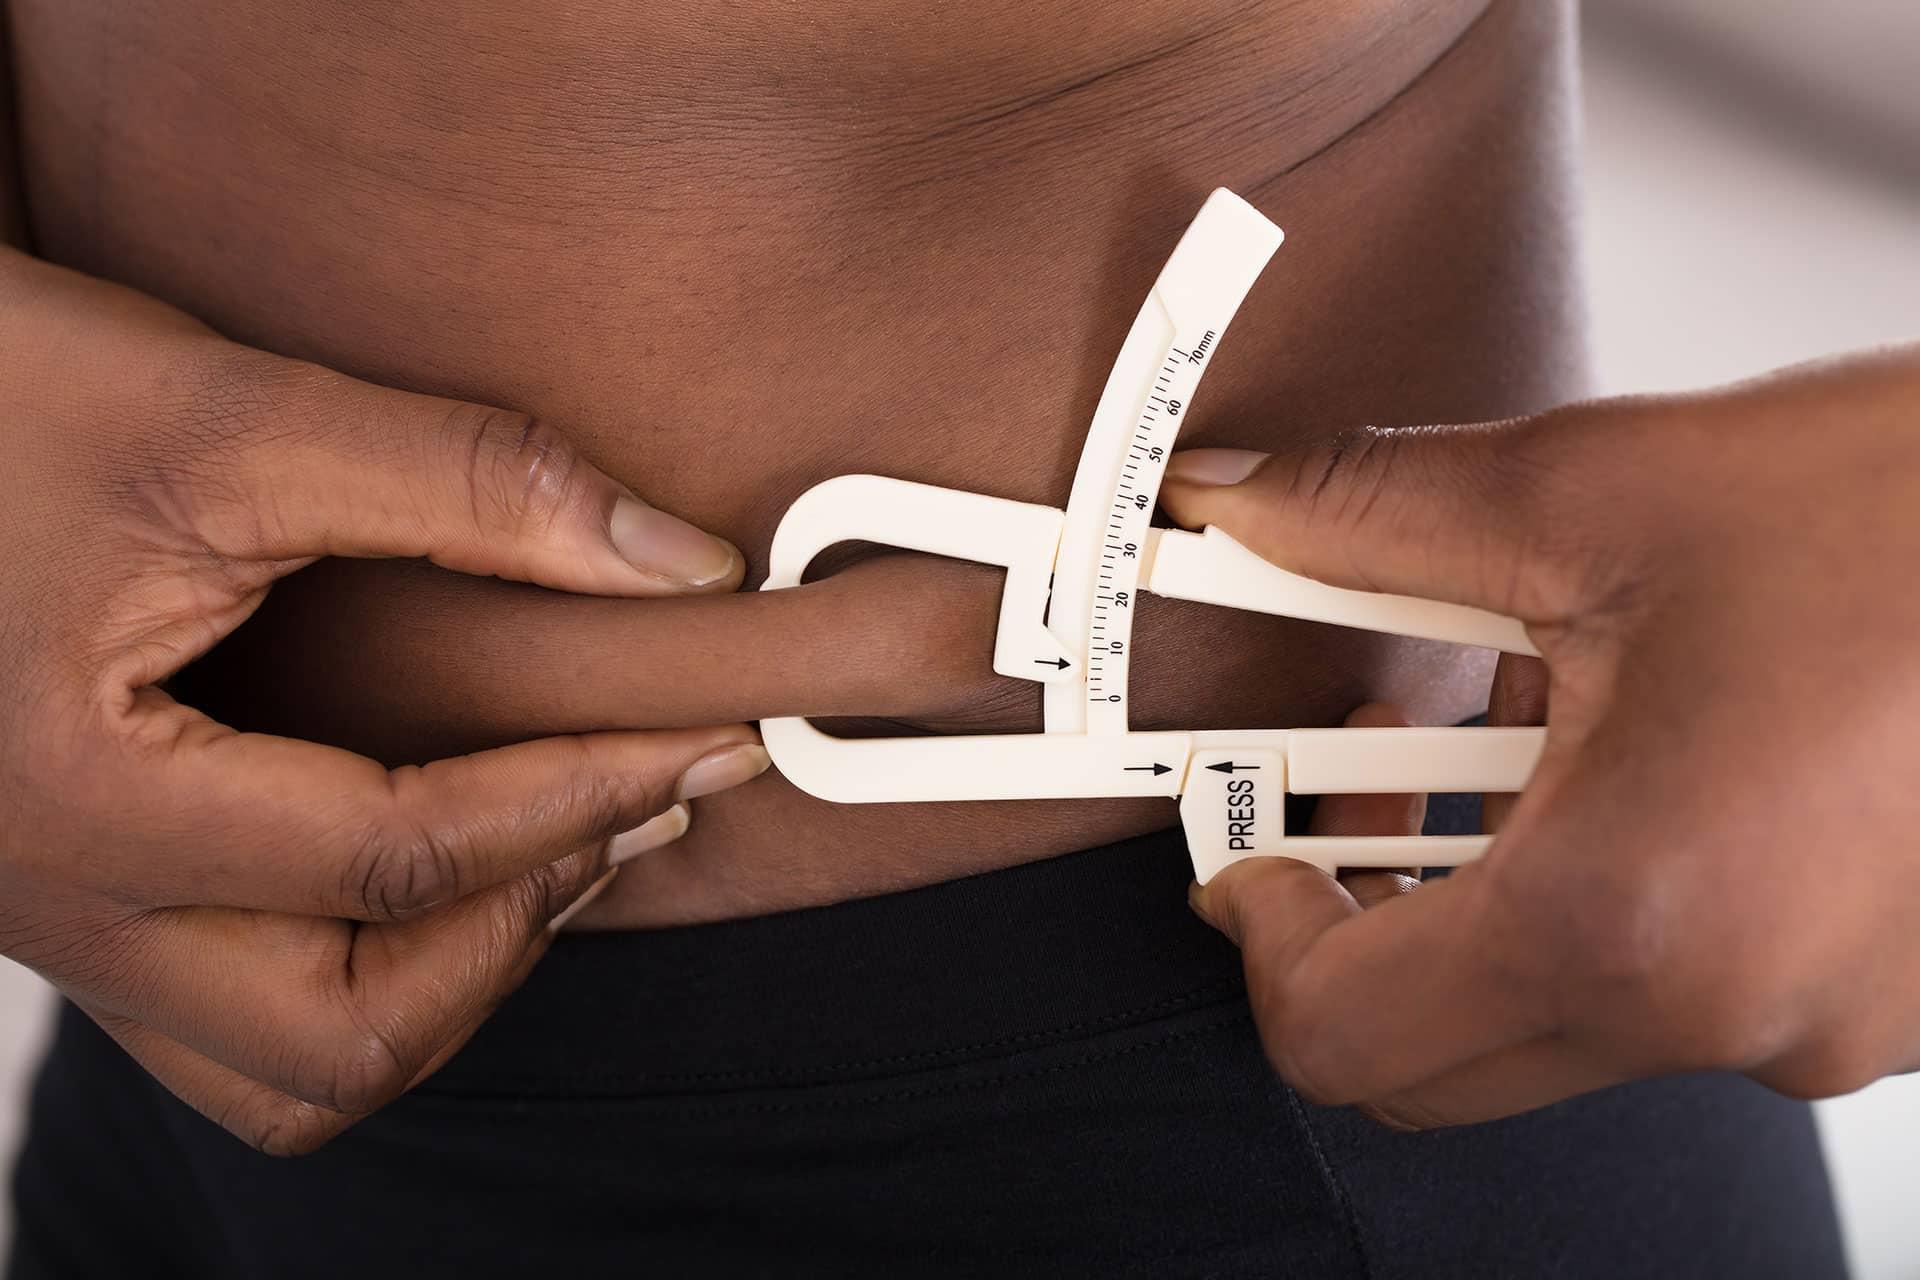 Body Fat Calipers: A Guide to Accurate Measurements